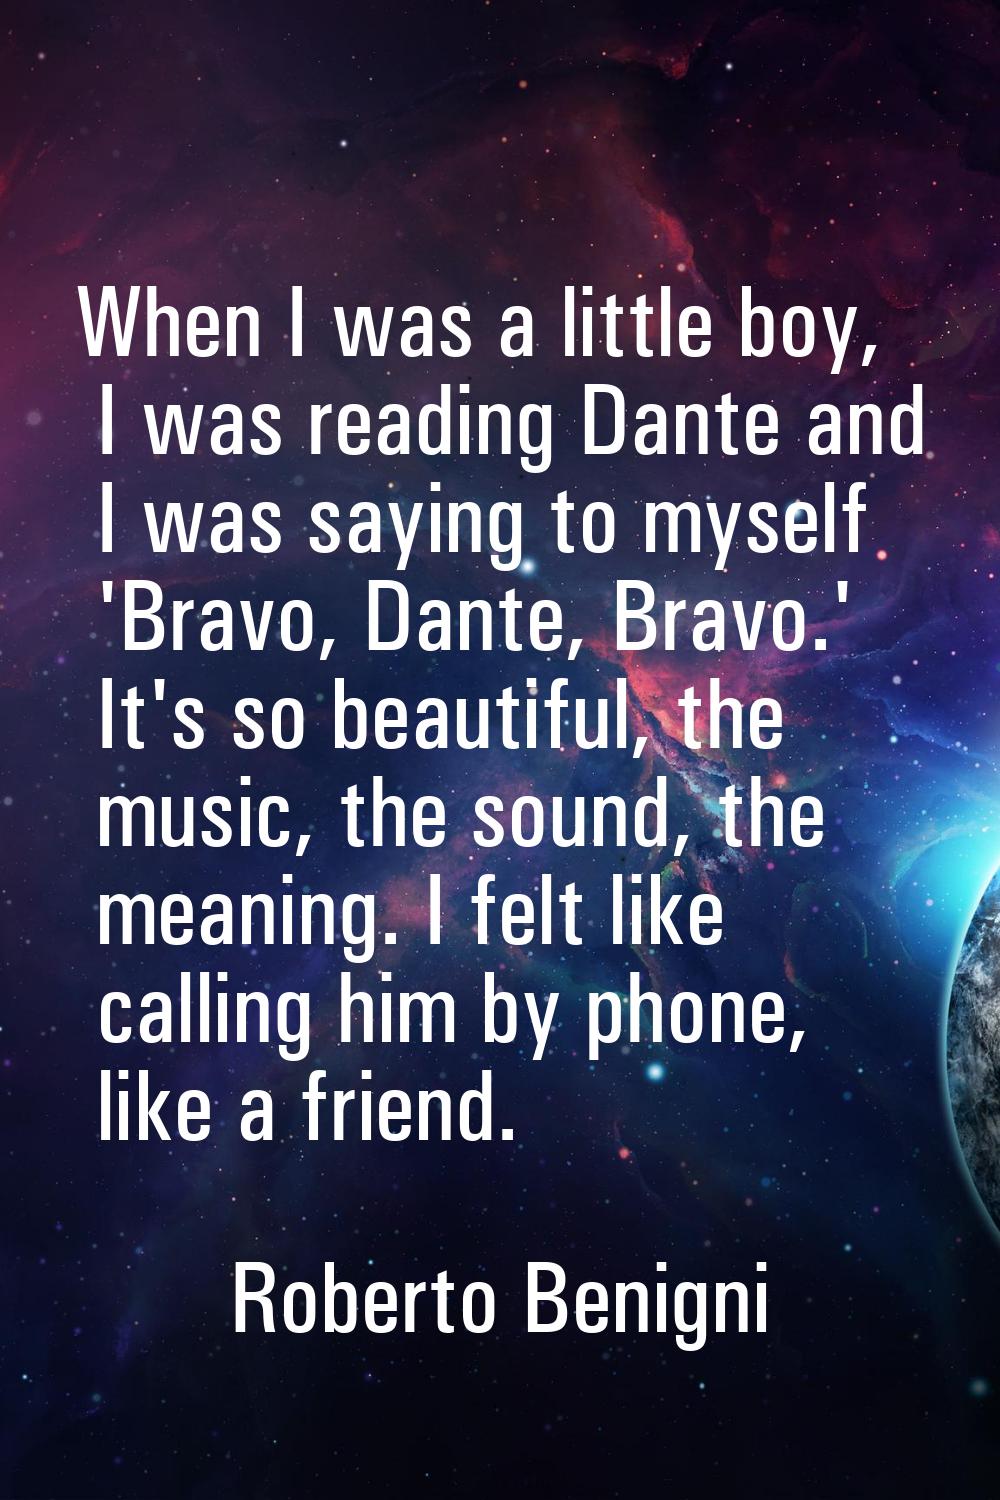 When I was a little boy, I was reading Dante and I was saying to myself 'Bravo, Dante, Bravo.' It's